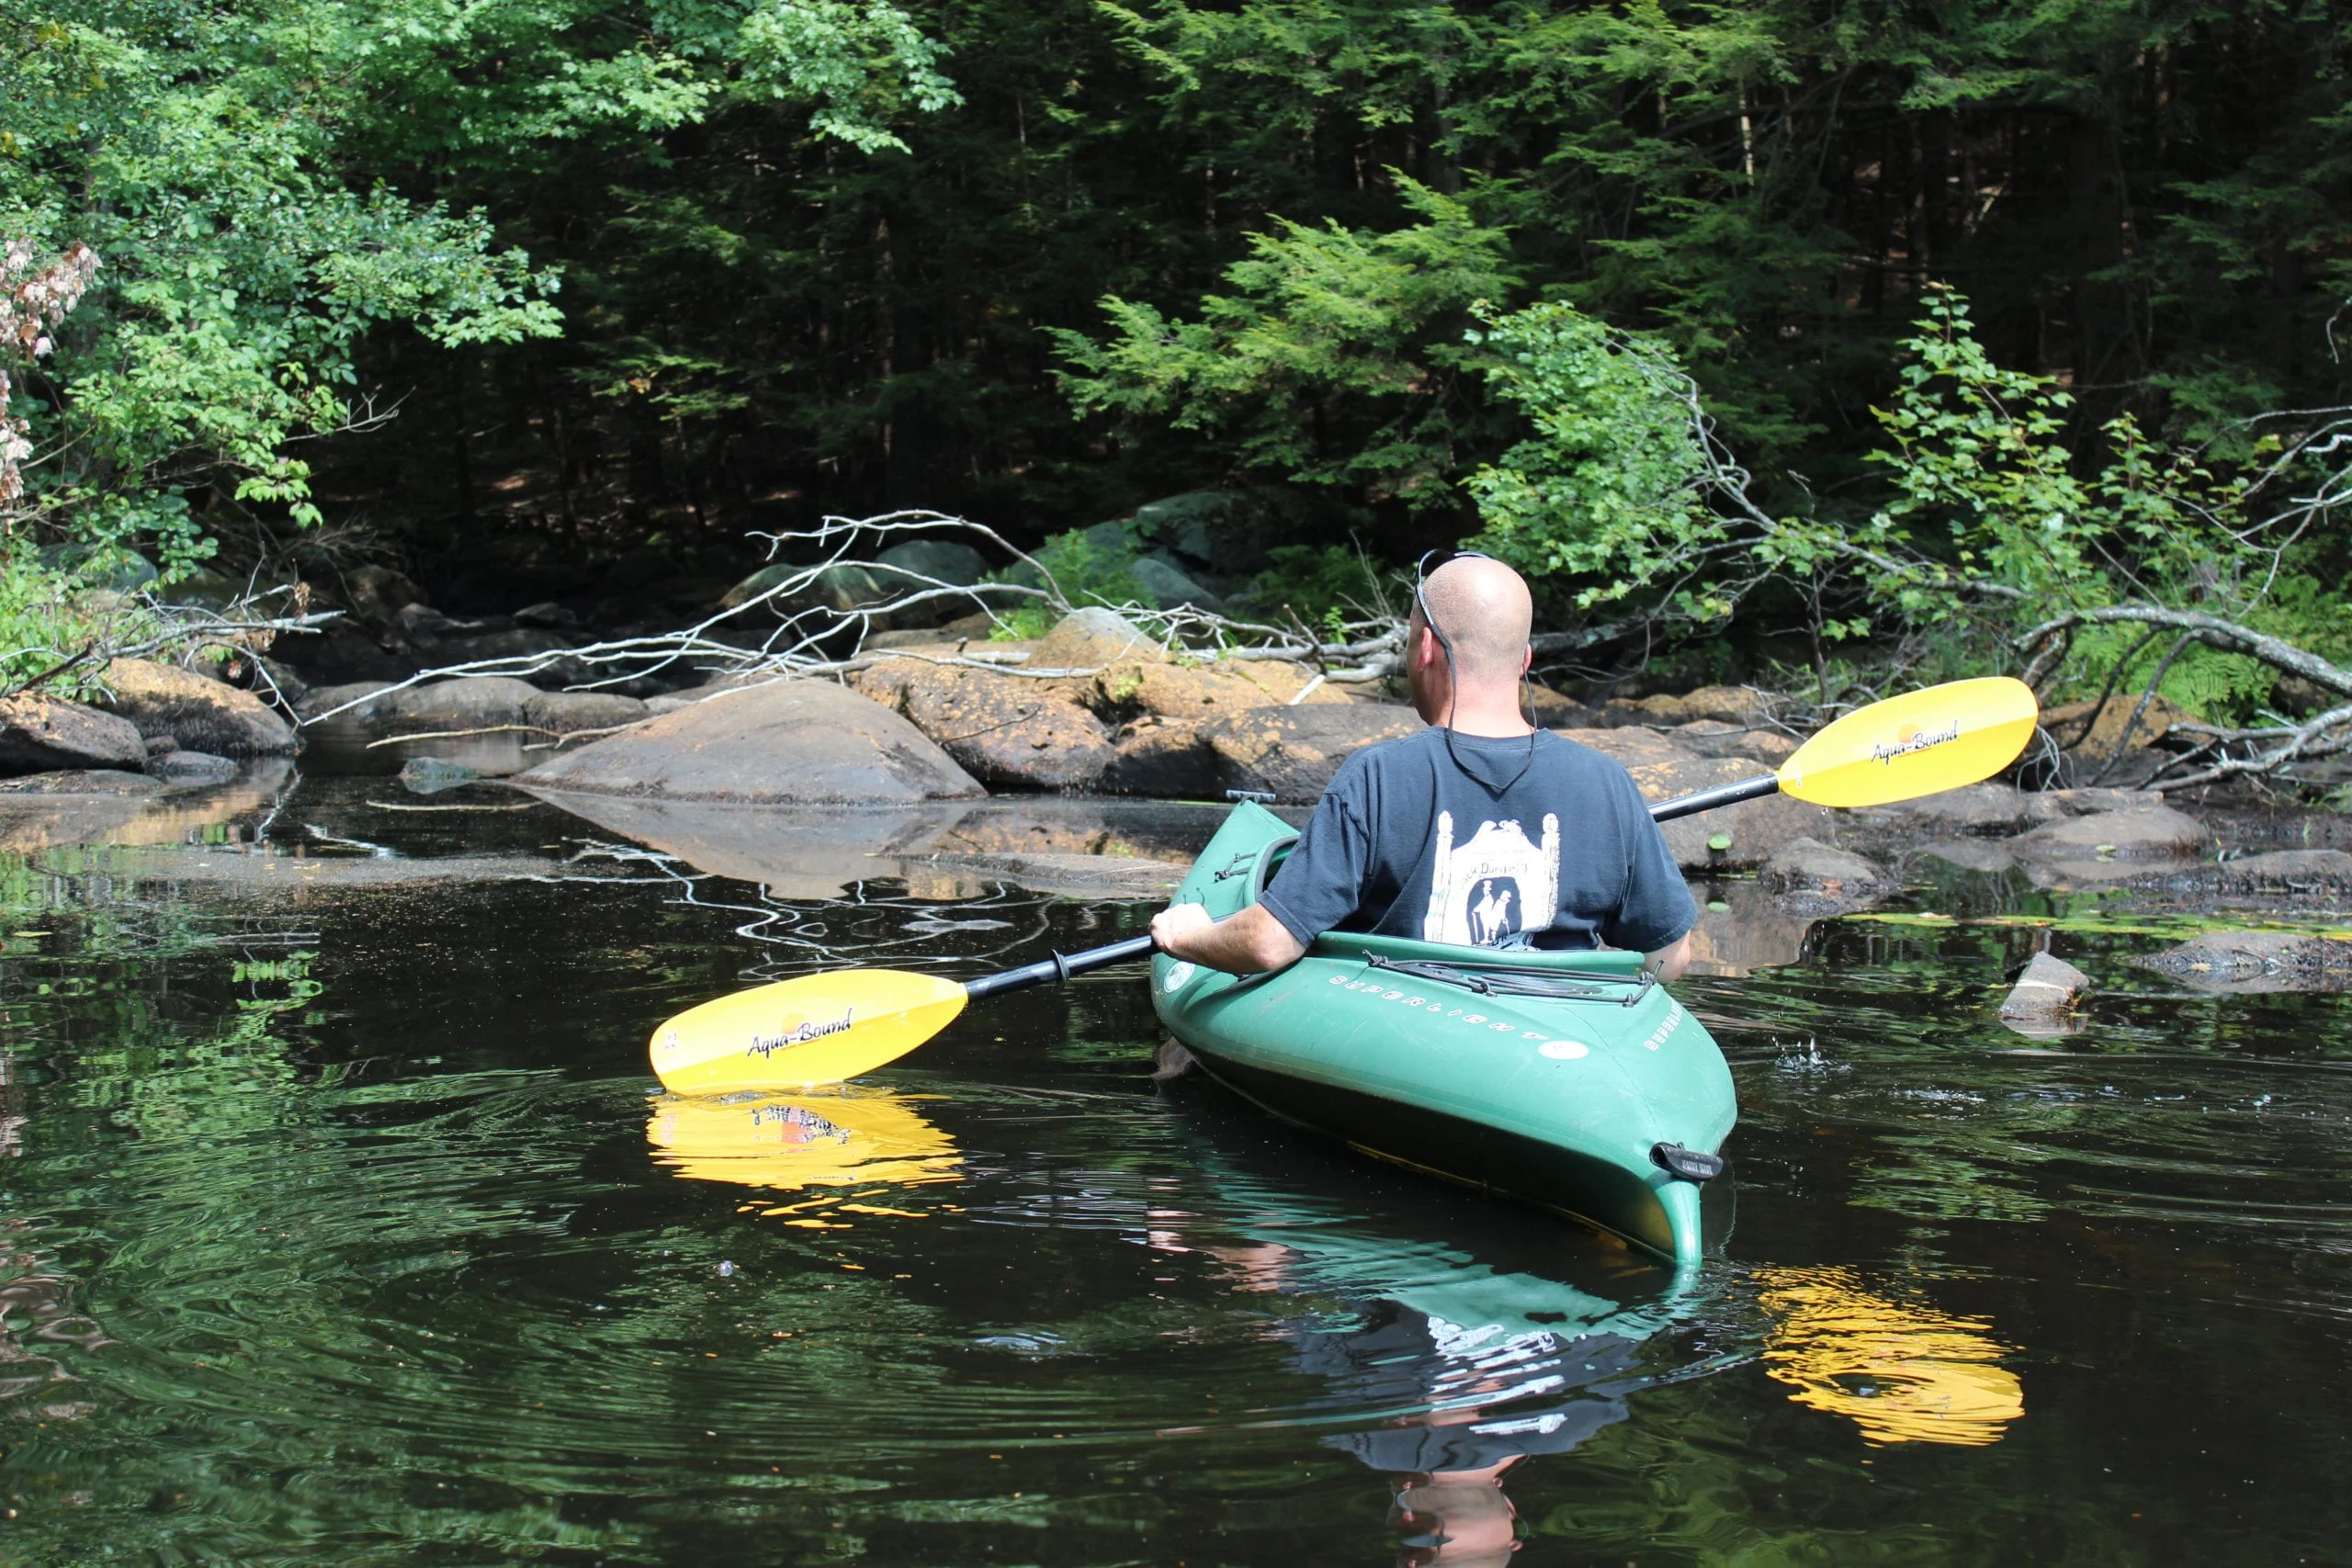 A kayaker maneuvers his kayak on the water. Rocks can be seen head on the edge of the waterway.